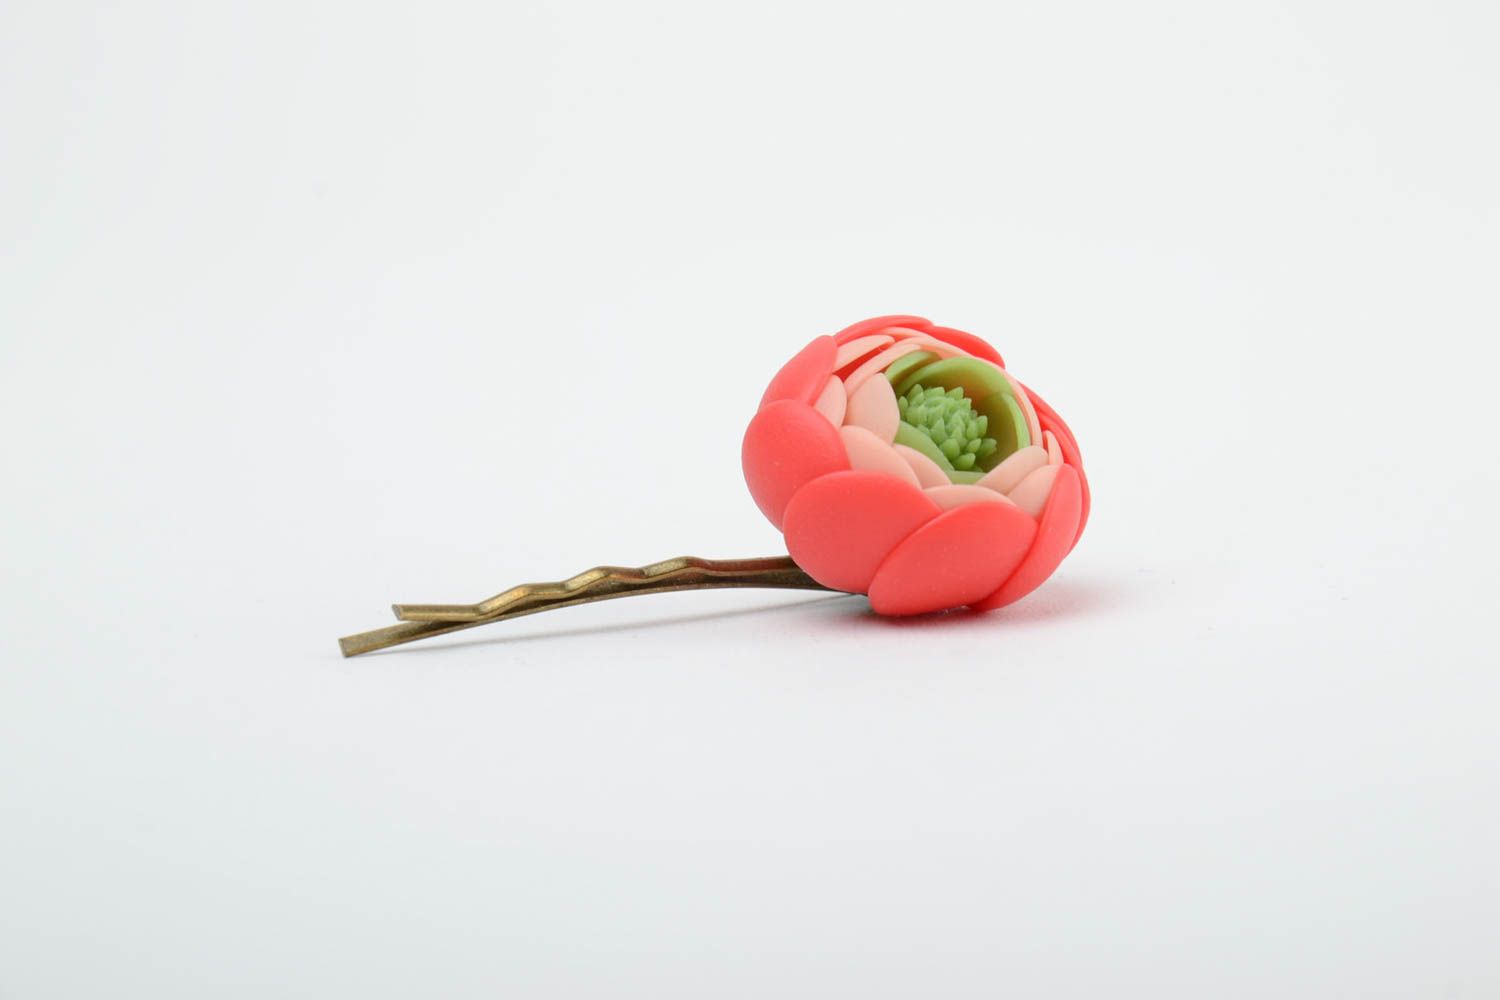 Handmade decorative metal hair pin with cold porcelain pink ranunculus flower photo 4